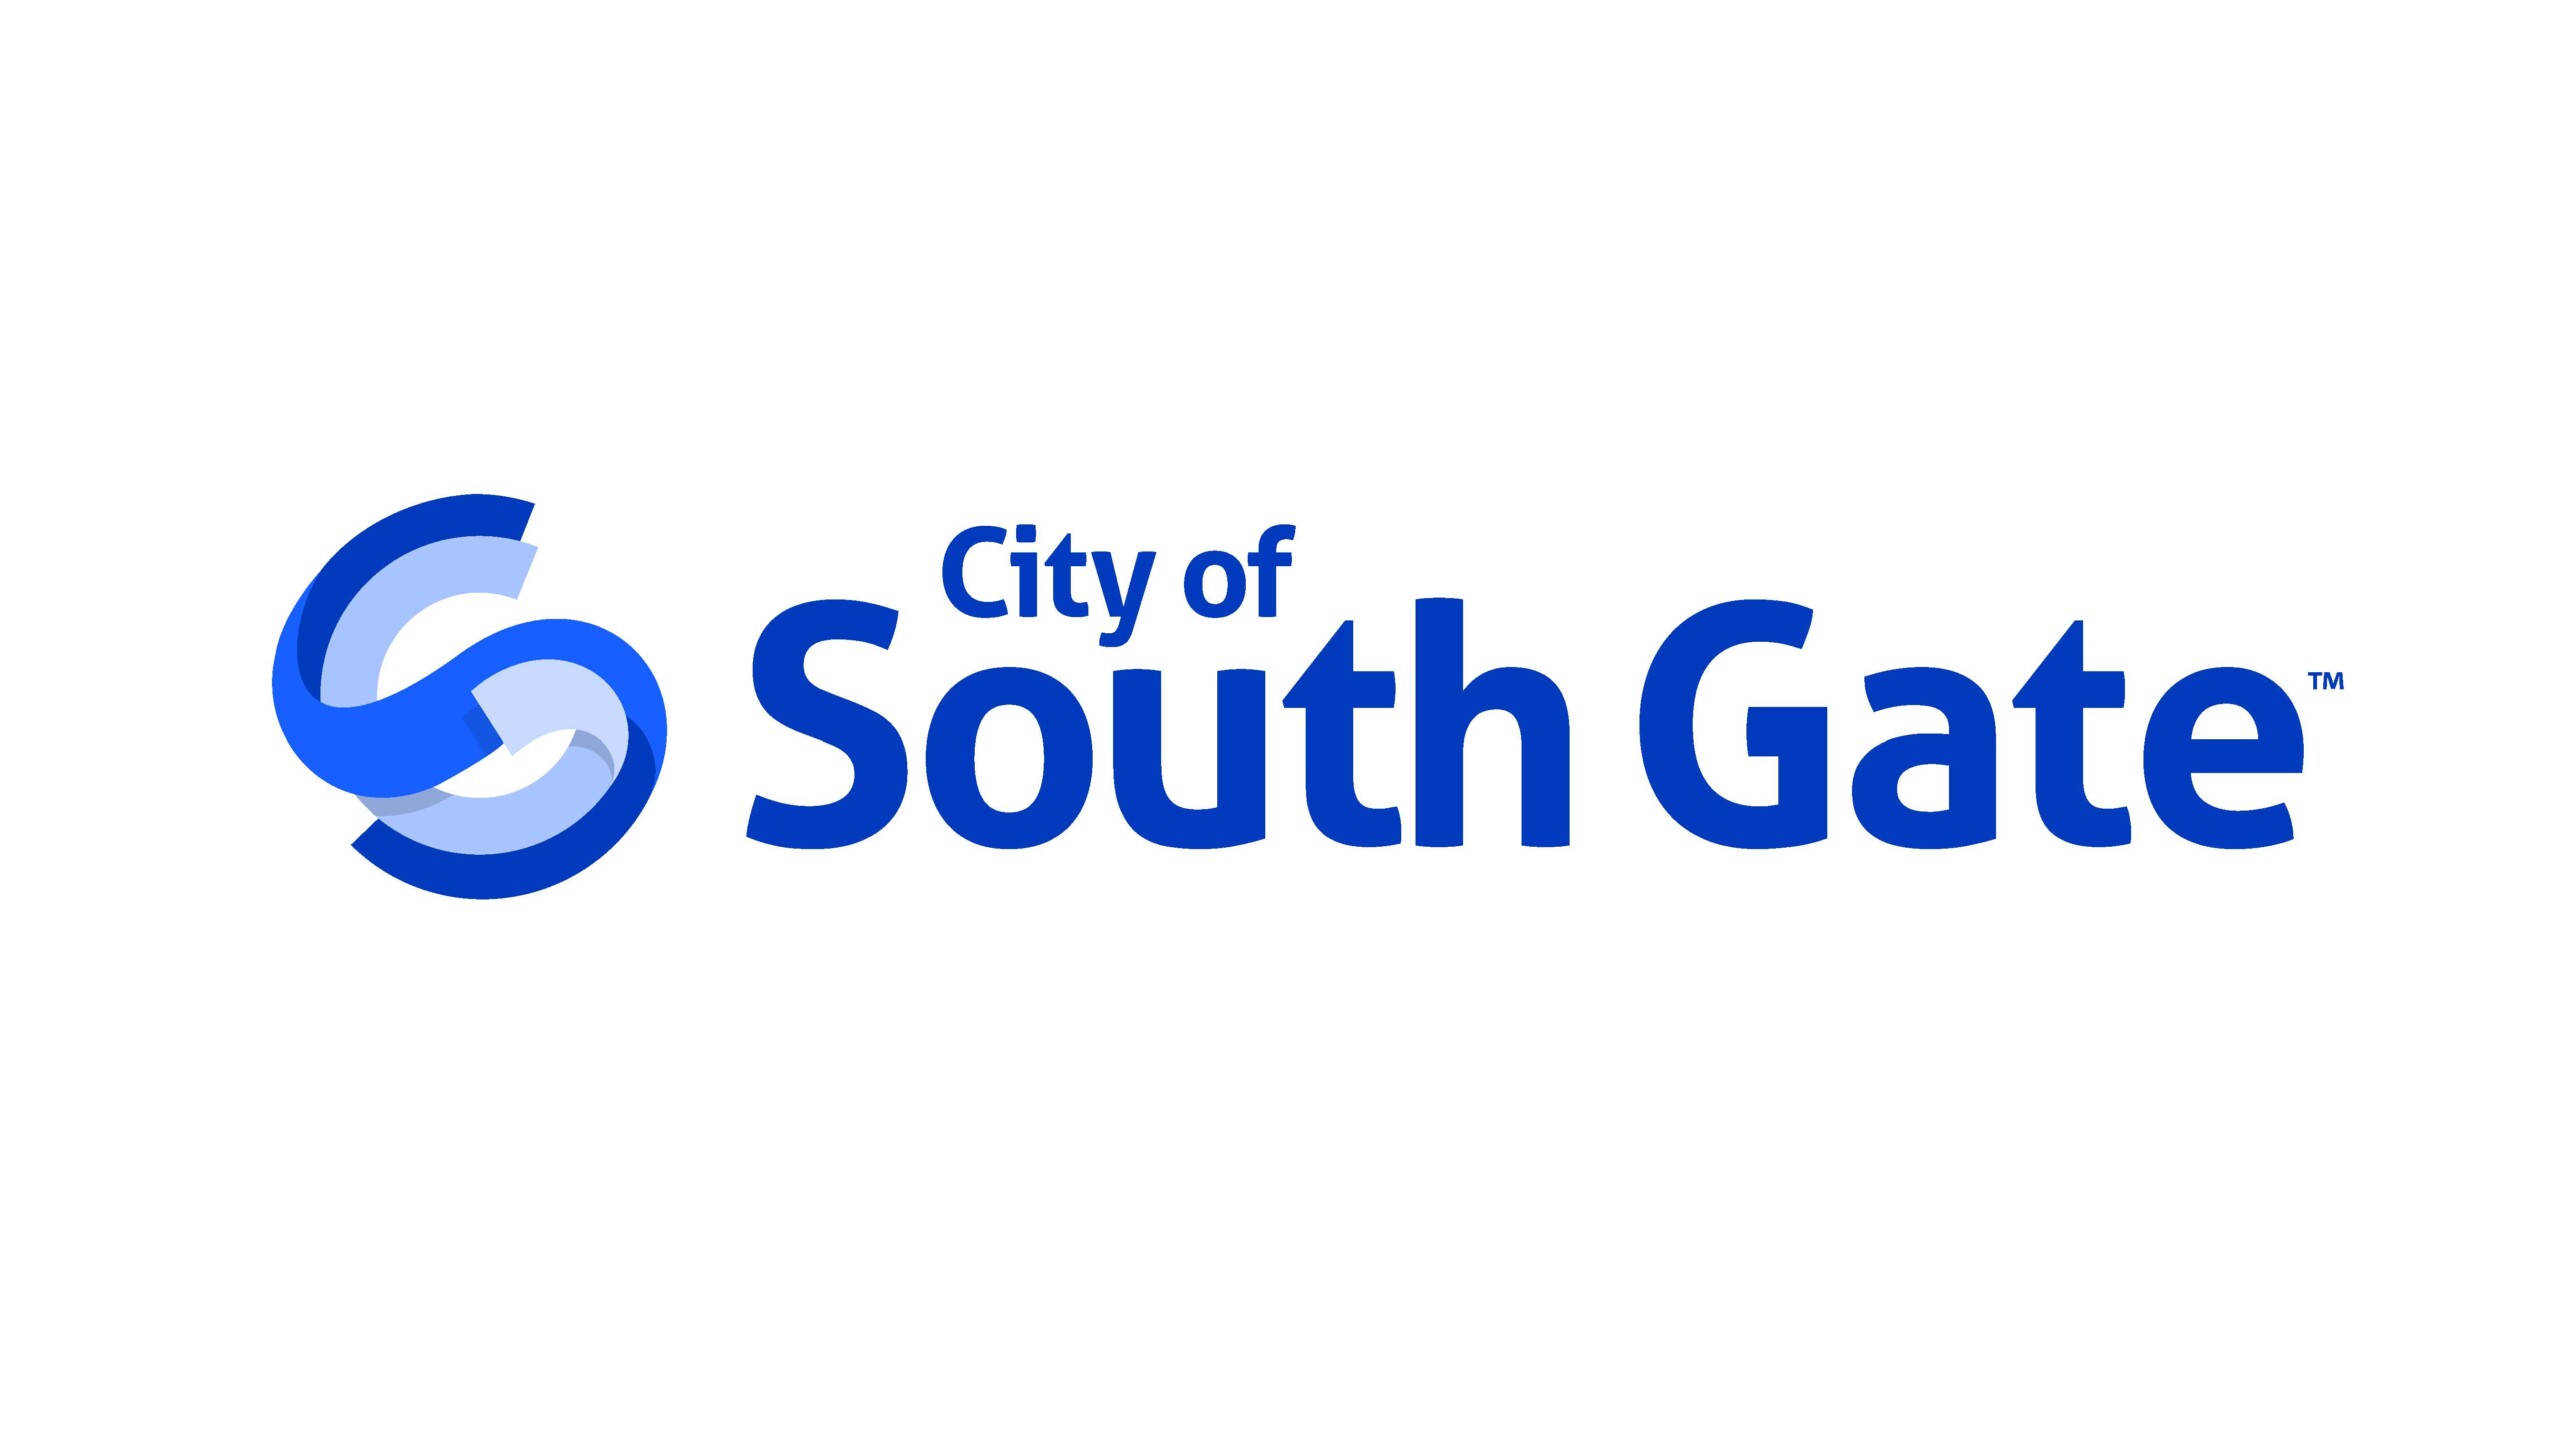 City Logo and Seal City of South Gate